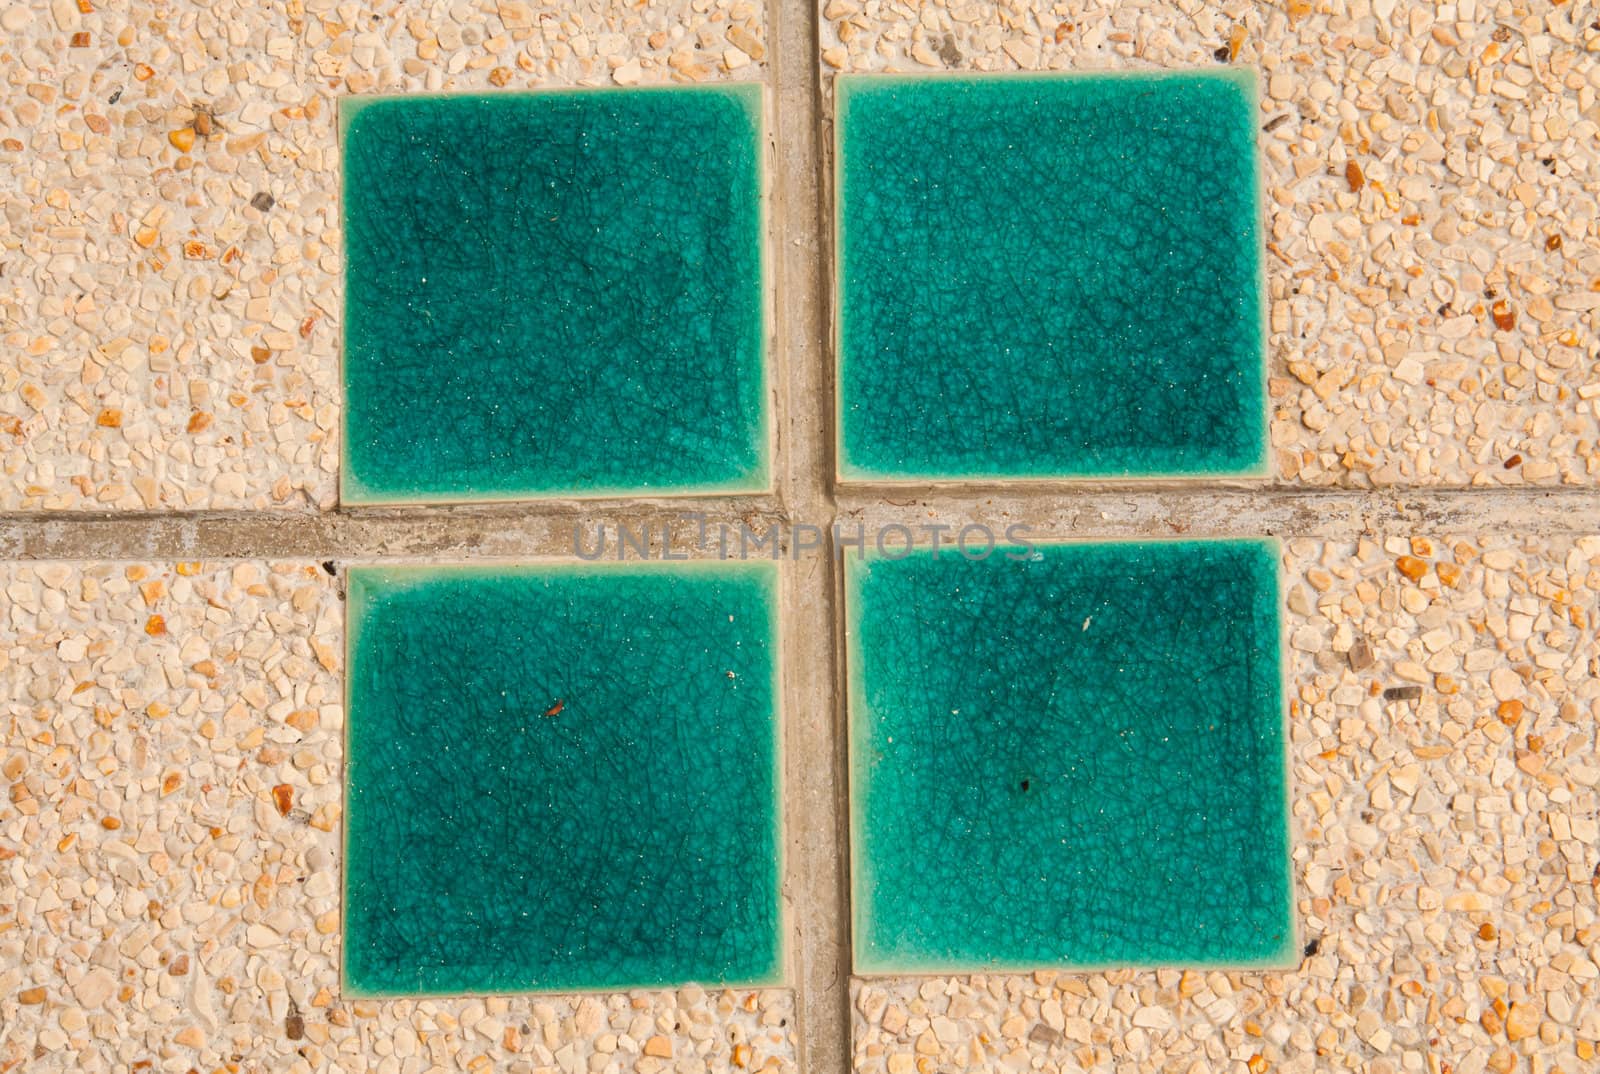 Tiles in the tile surface facing the green.